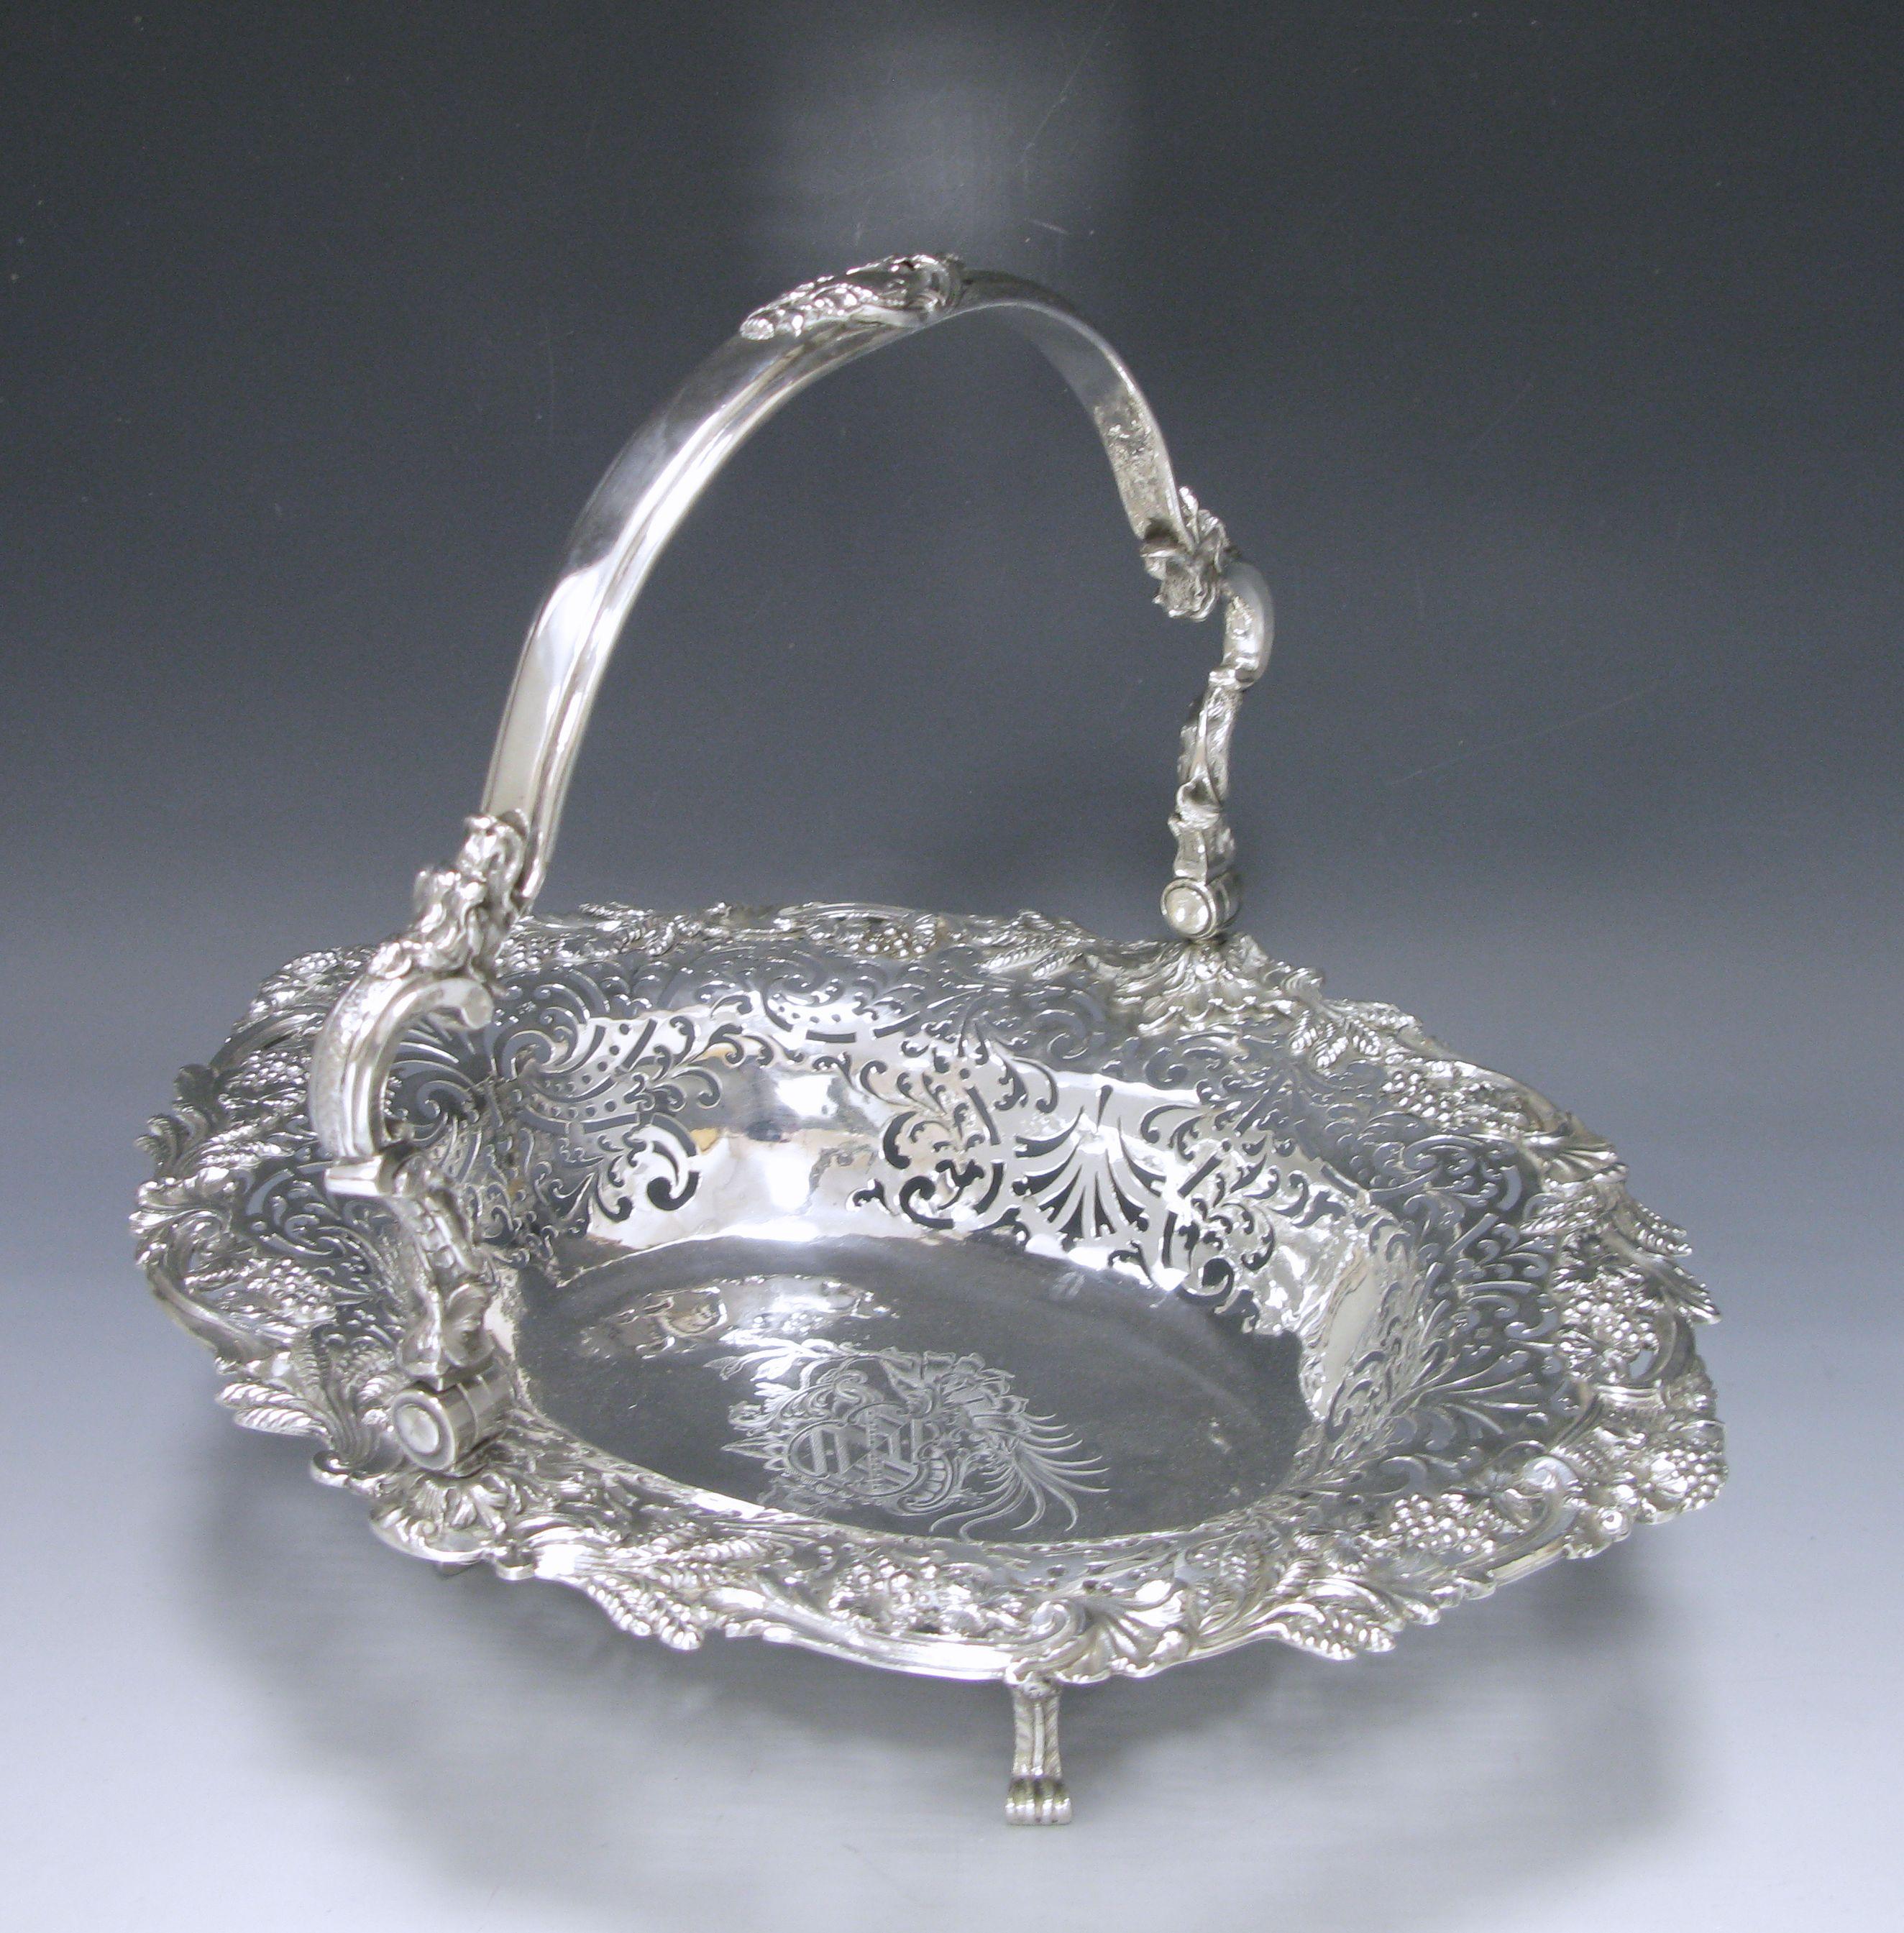 A George II antique silver basket that was traditionally used for cakes but also could be used for fruit or bread. The basket is of shaped oval outline with applied and cast border of wheat-sheaves, acanthus leaves, fruiting vine tendrils and basket